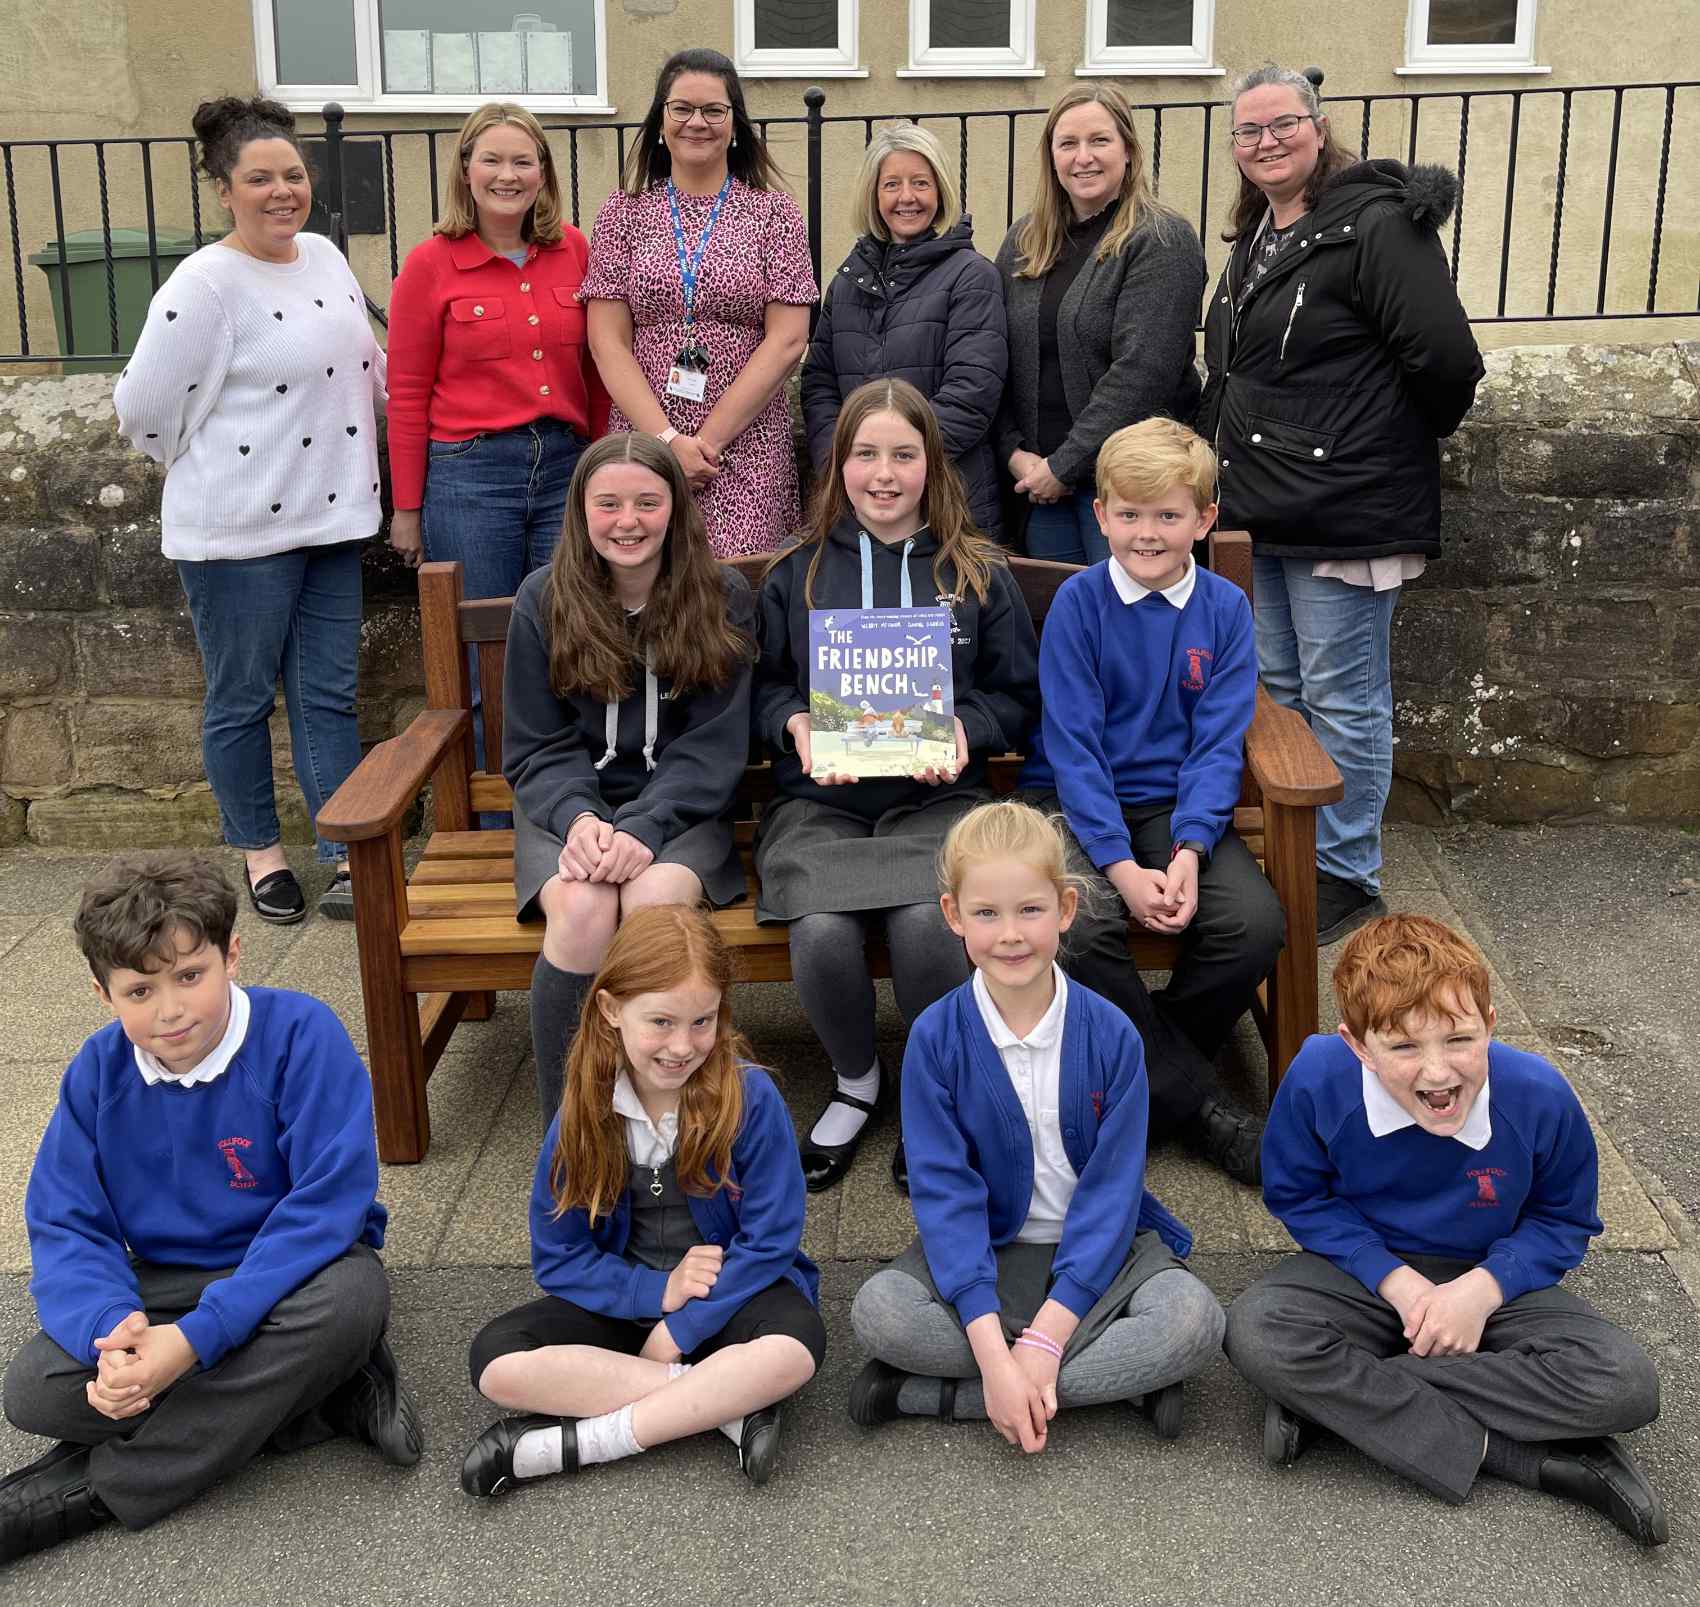 Friends of Follifoot School present Friendship Bench to Follifoot school children Back row L to R: Sophie Griffiths from Harvey George Limited; Laura Hartley, Chair of FOFS; Rebecca Holland, Headteacher at Follifoot Primary School; Claire Hartley, Vicky Hodgson and Sam Riley from FOFS Middle row L to R: Lizzie, Annabelle, William Front row L to R: Elliot, Jessica, Florence, Jasper